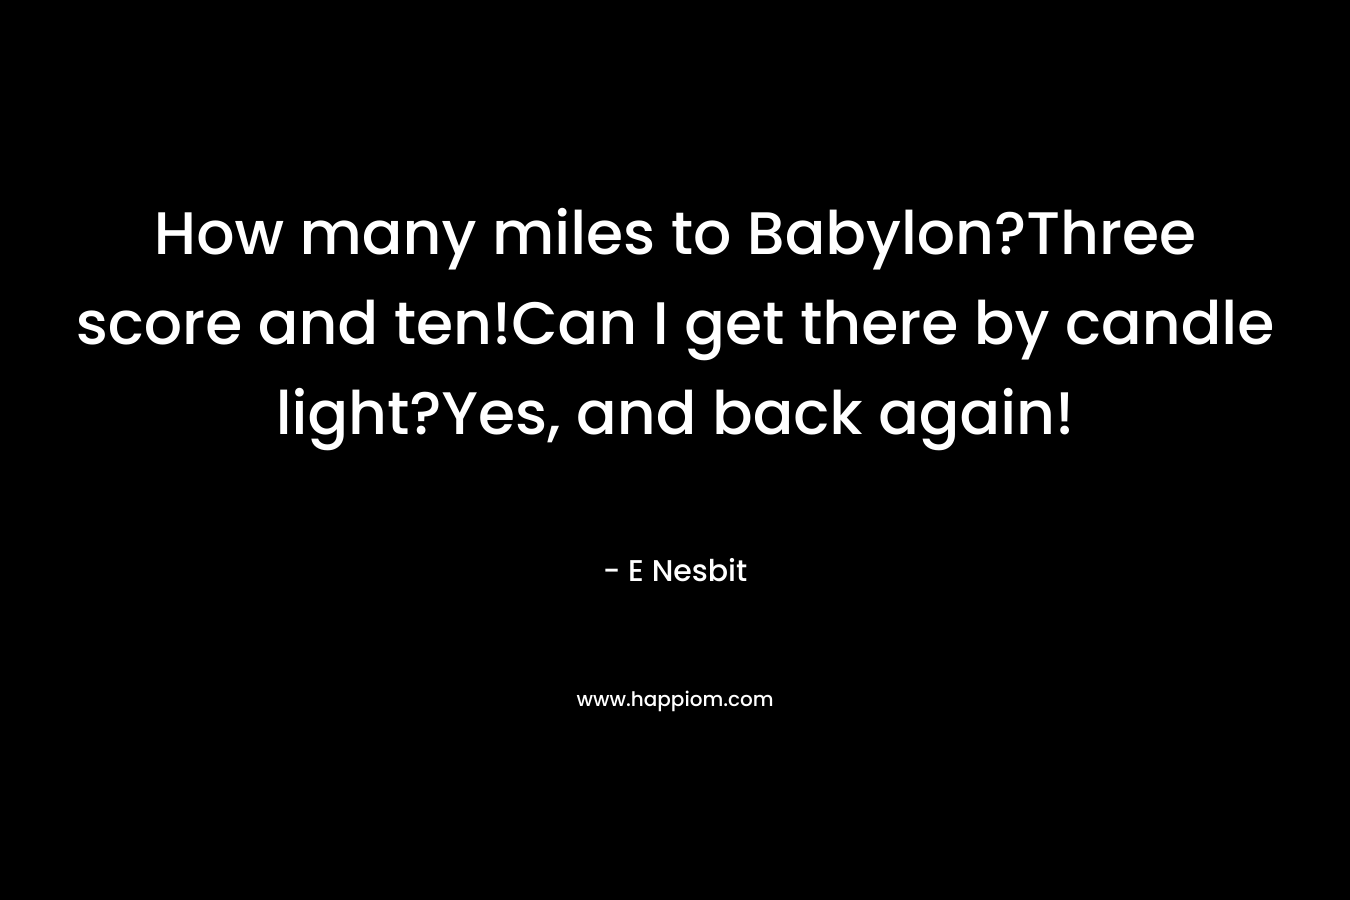 How many miles to Babylon?Three score and ten!Can I get there by candle light?Yes, and back again! – E Nesbit